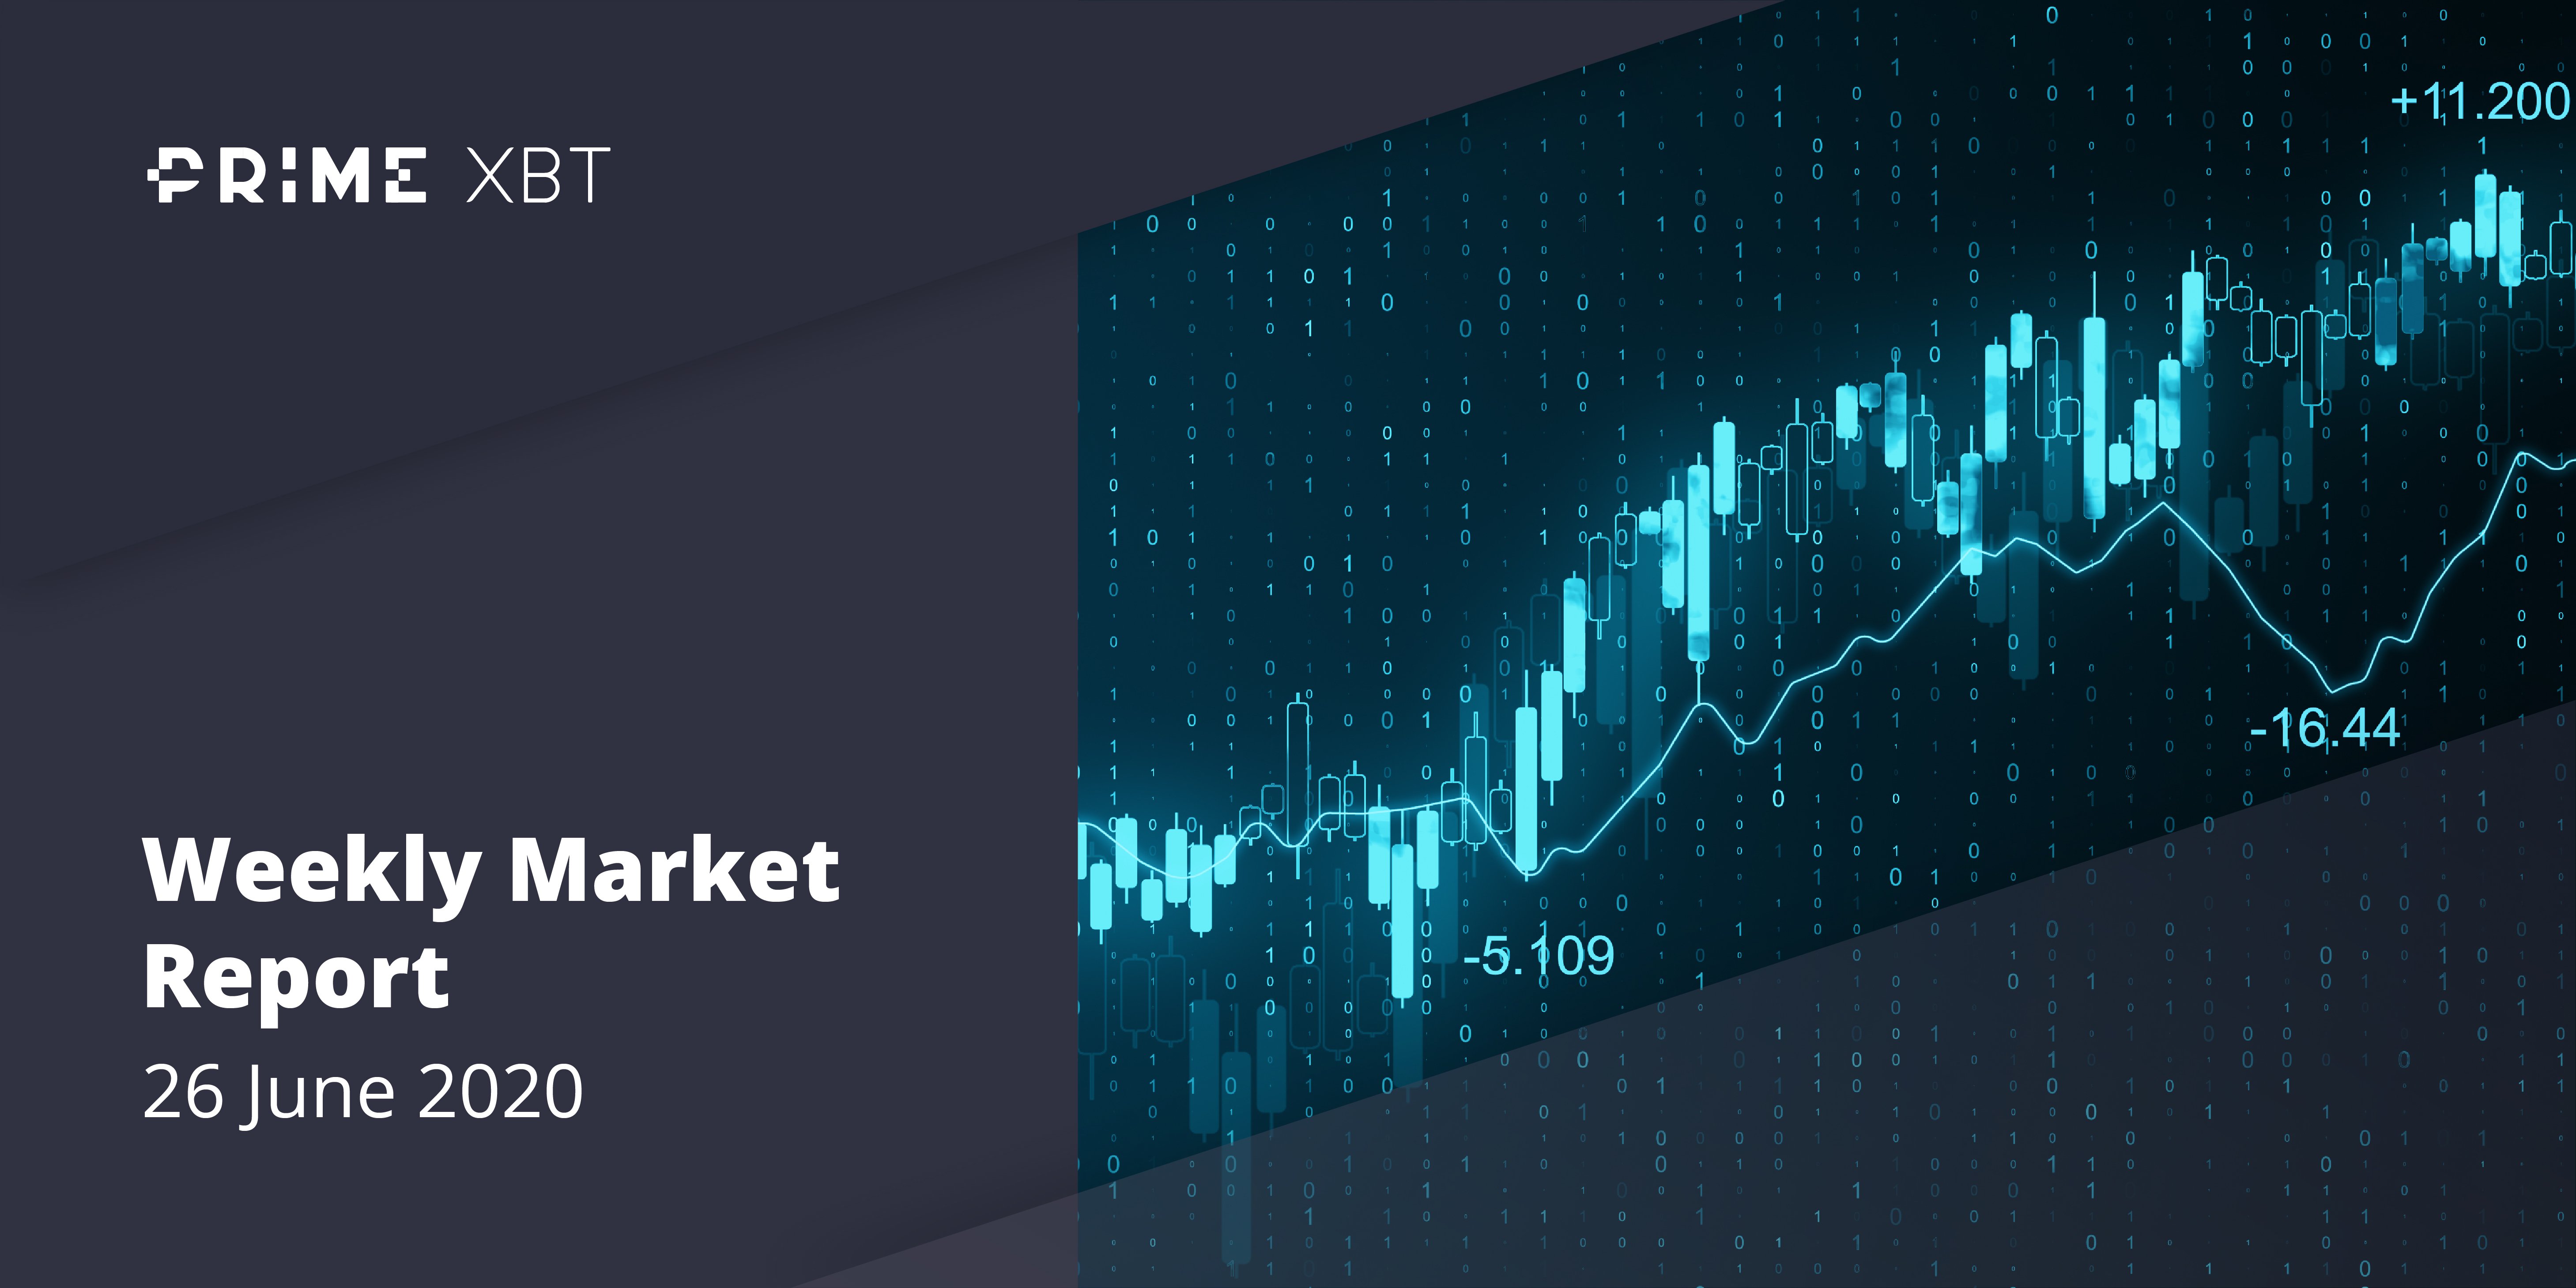 Crypto Market Report: Everything Bitcoin Trends Sideways, Spotlight on Ethereum and DeFi - 26.06.20